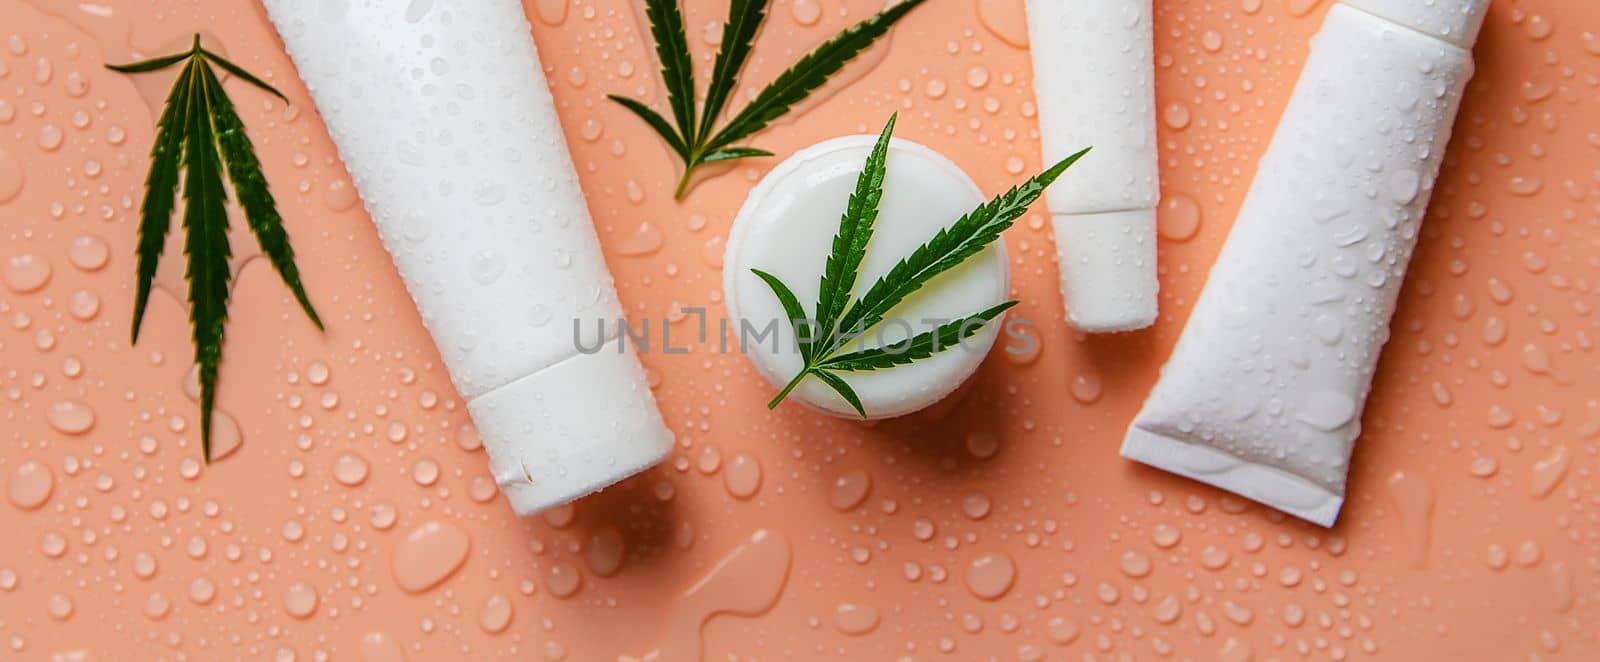 Cream of cannabis on a light background. Selective focus. Nature.